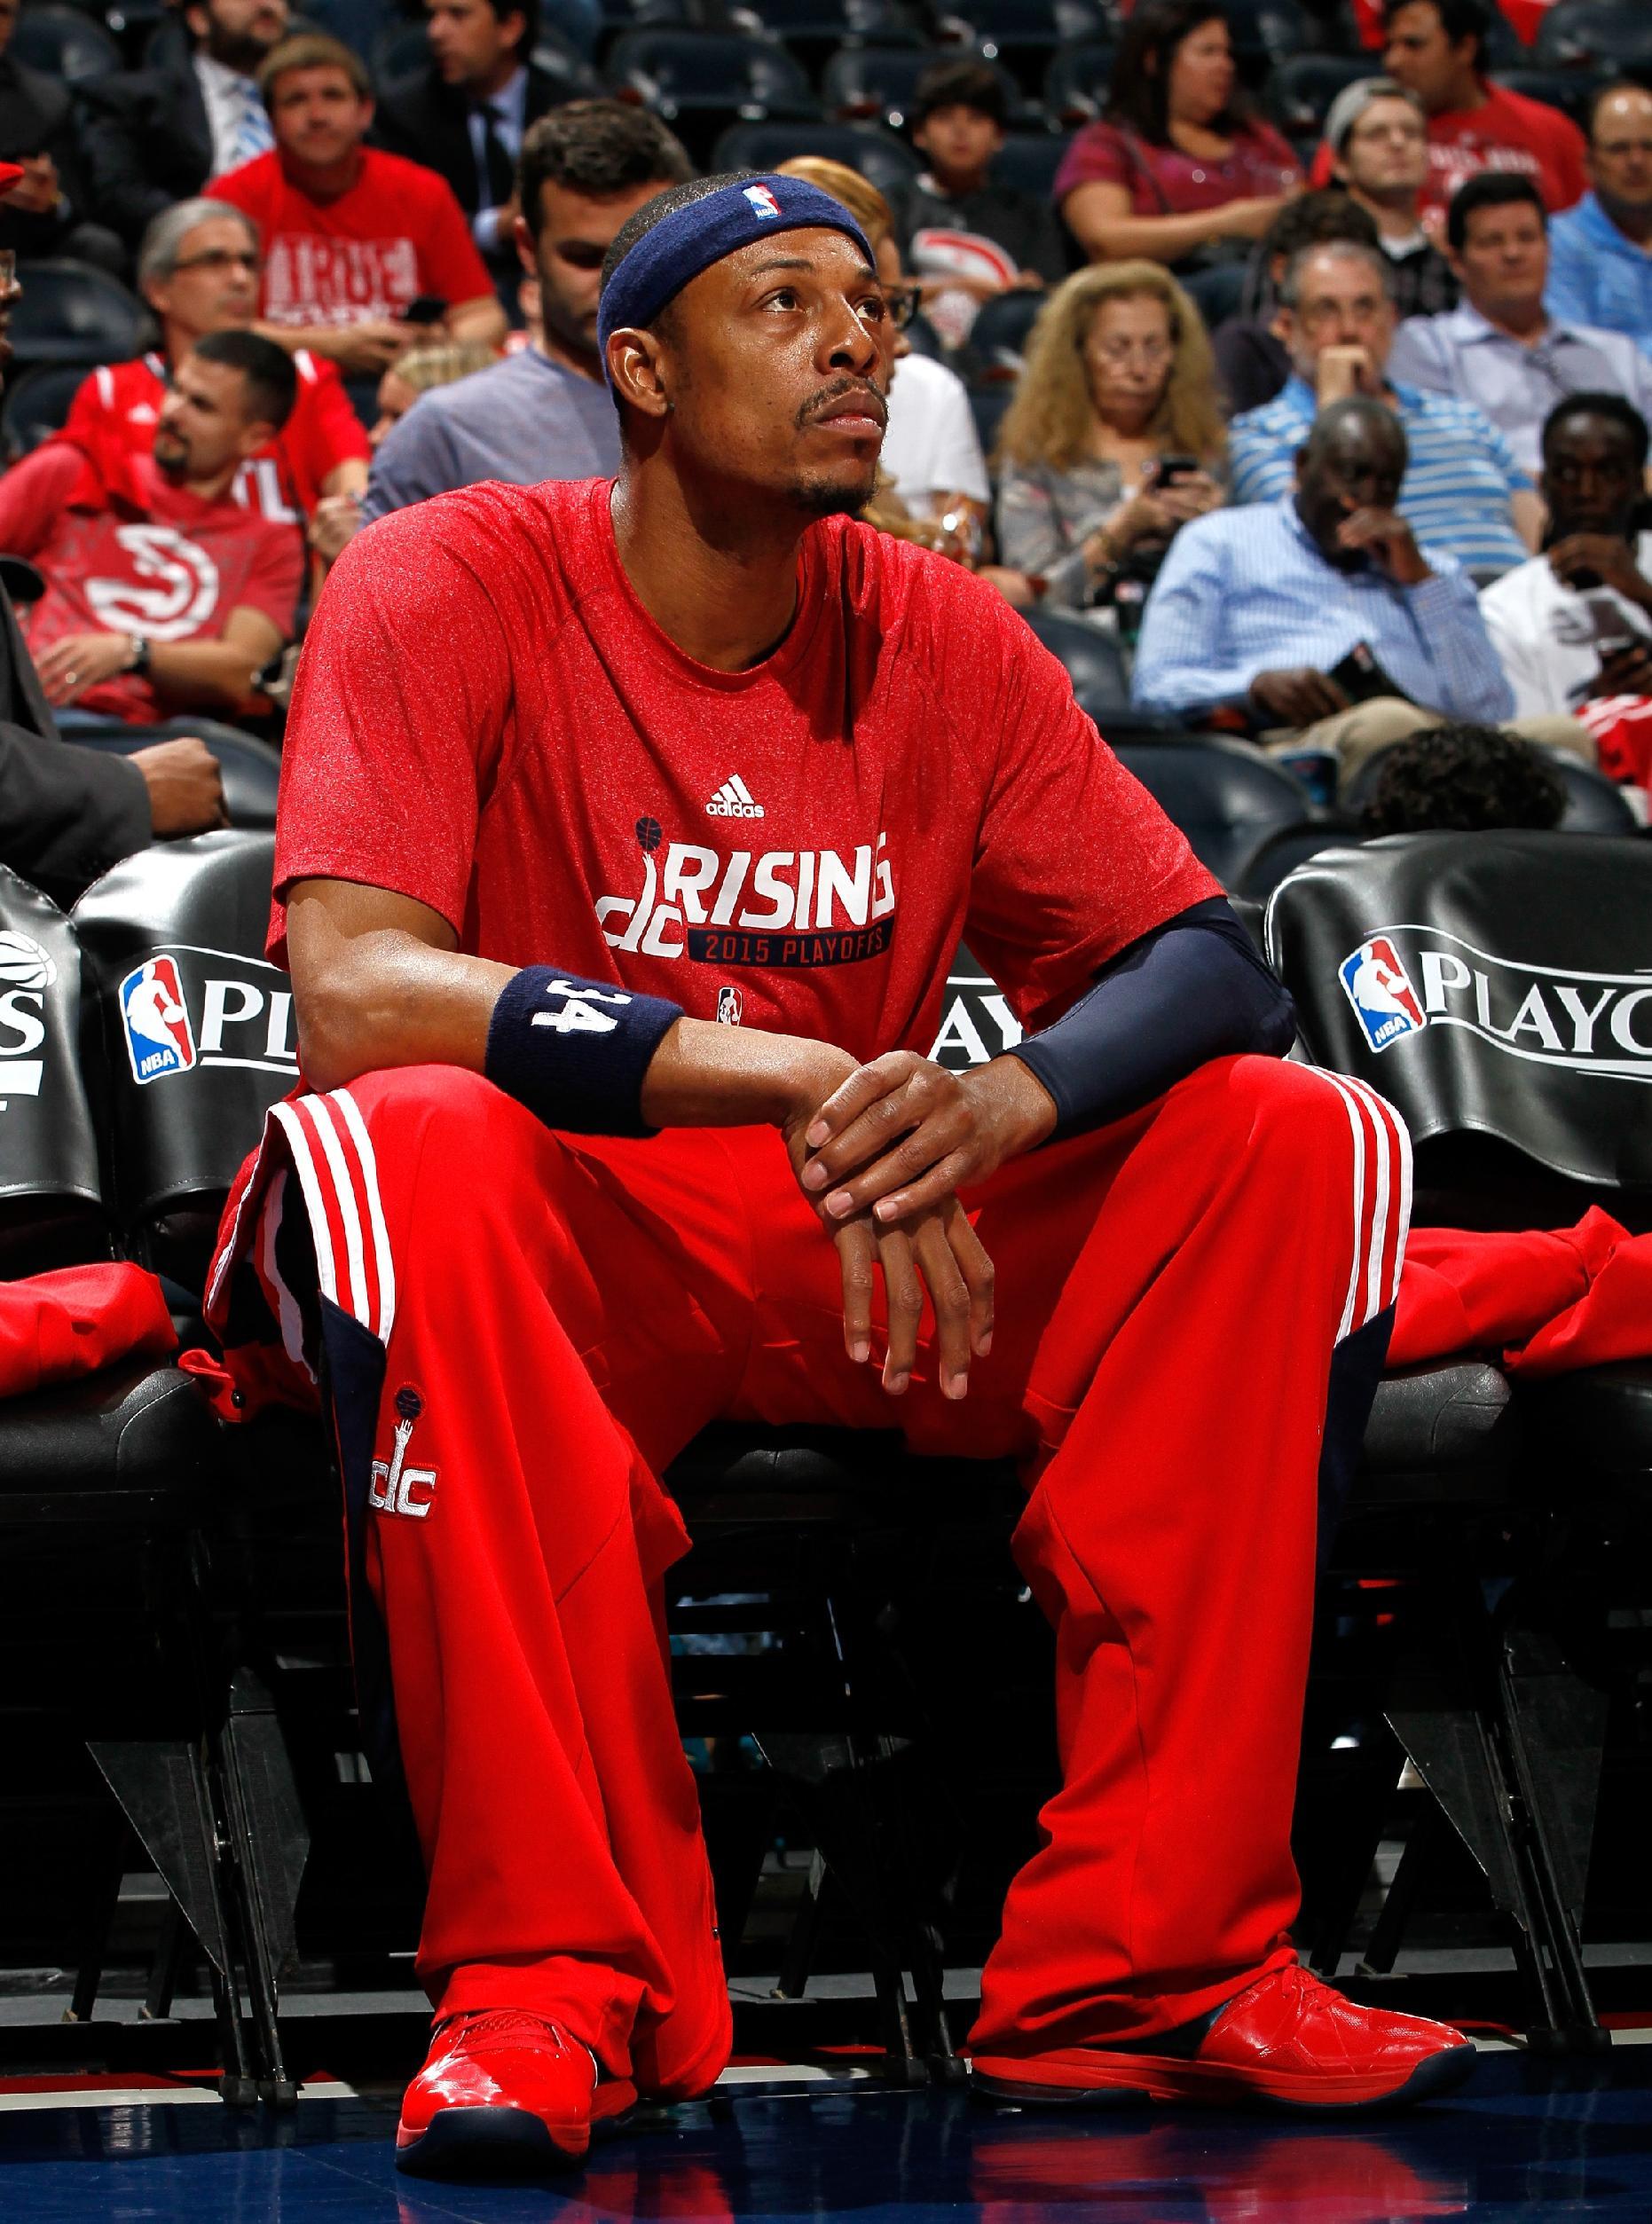 ATLANTA, GA - MAY 13:  Paul Pierce #34 of the Washington Wizards warms up for Game Five of the Eastern Conference Semifinals of the 2015 NBA Playoffs against the Atlanta Hawks at Philips Arena on May 13, 2015 in Atlanta, Georgia.  NOTE TO USER: User expressly acknowledges and agrees that, by downloading and/or using this photograph, user is consenting to the terms and conditions of the Getty Images License Agreement.  (Photo by Kevin C. Cox/Getty Images)